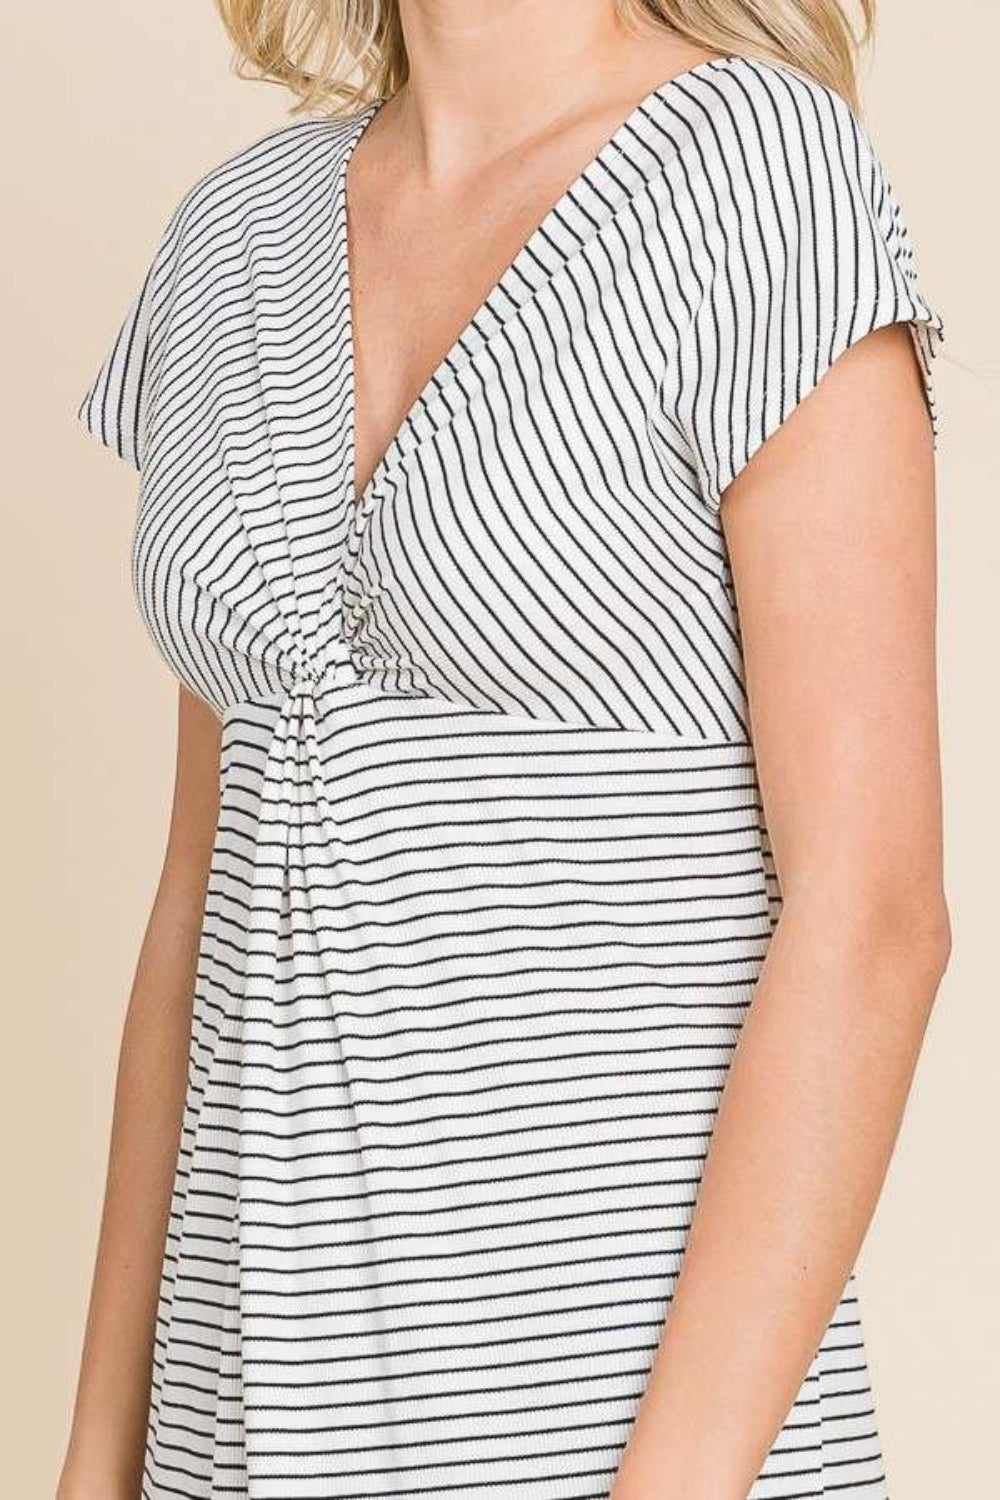 Culture Code Striped Twisted Detail Dress